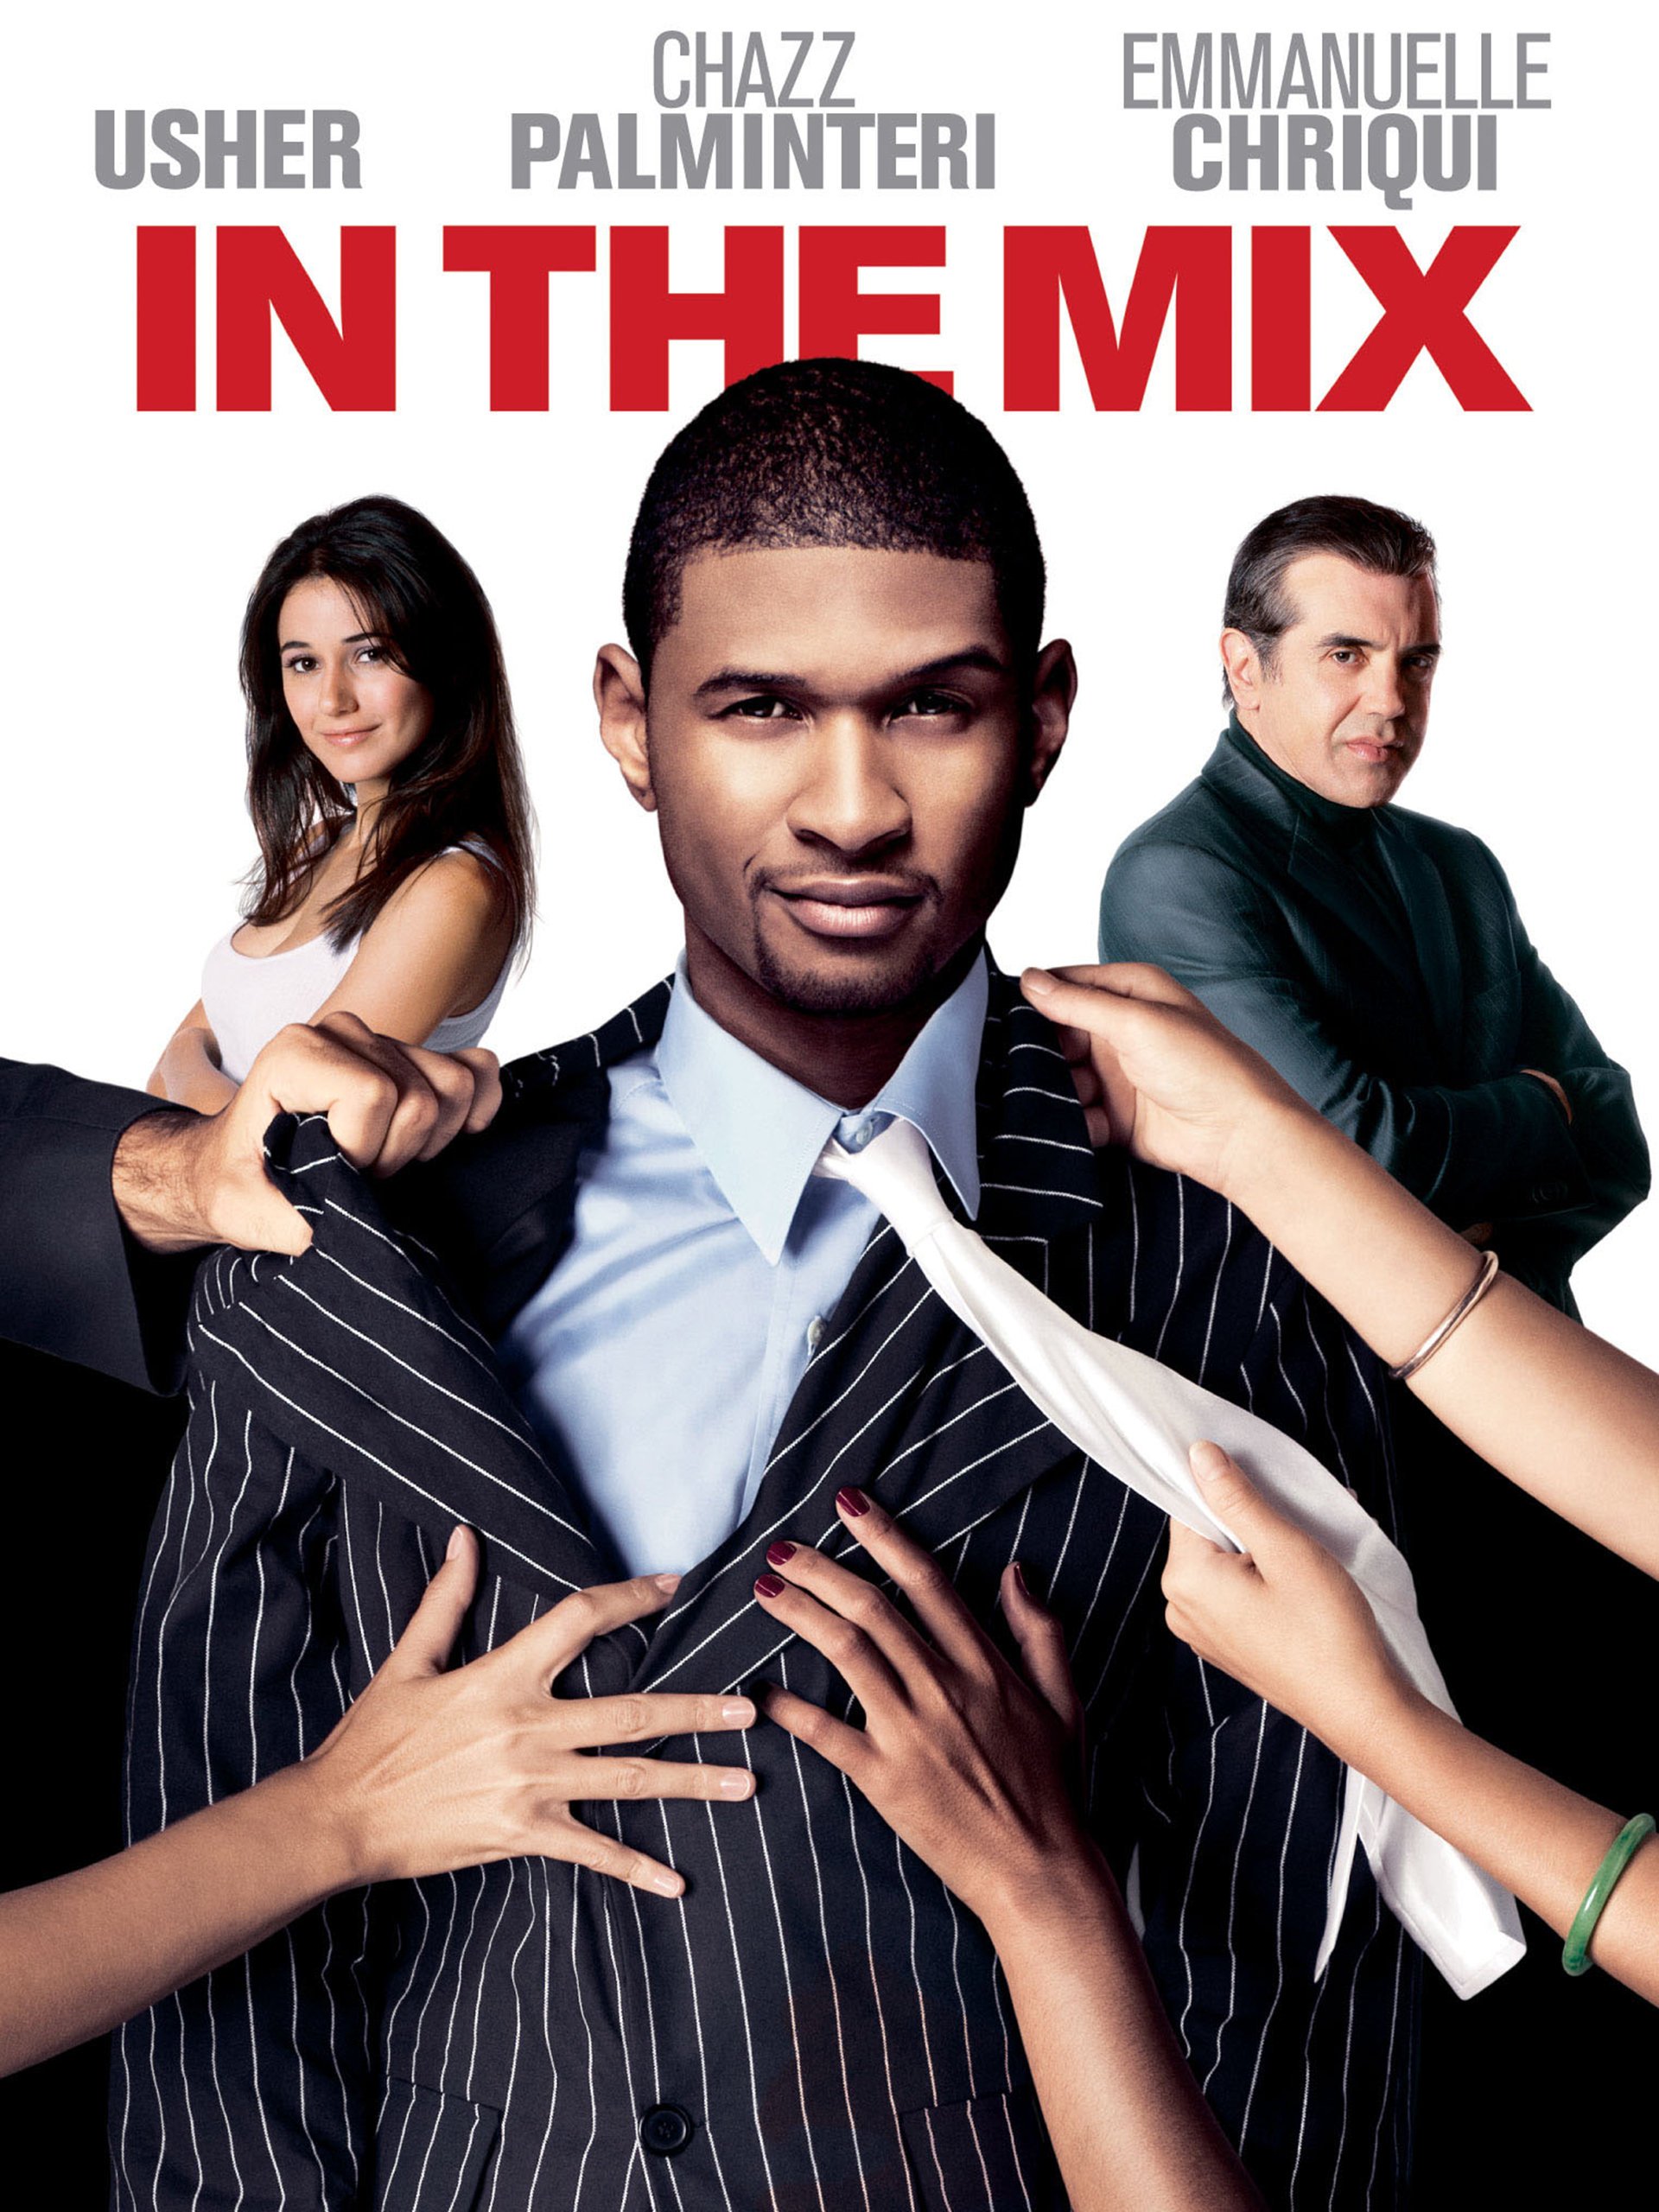 In the Mix (2005)